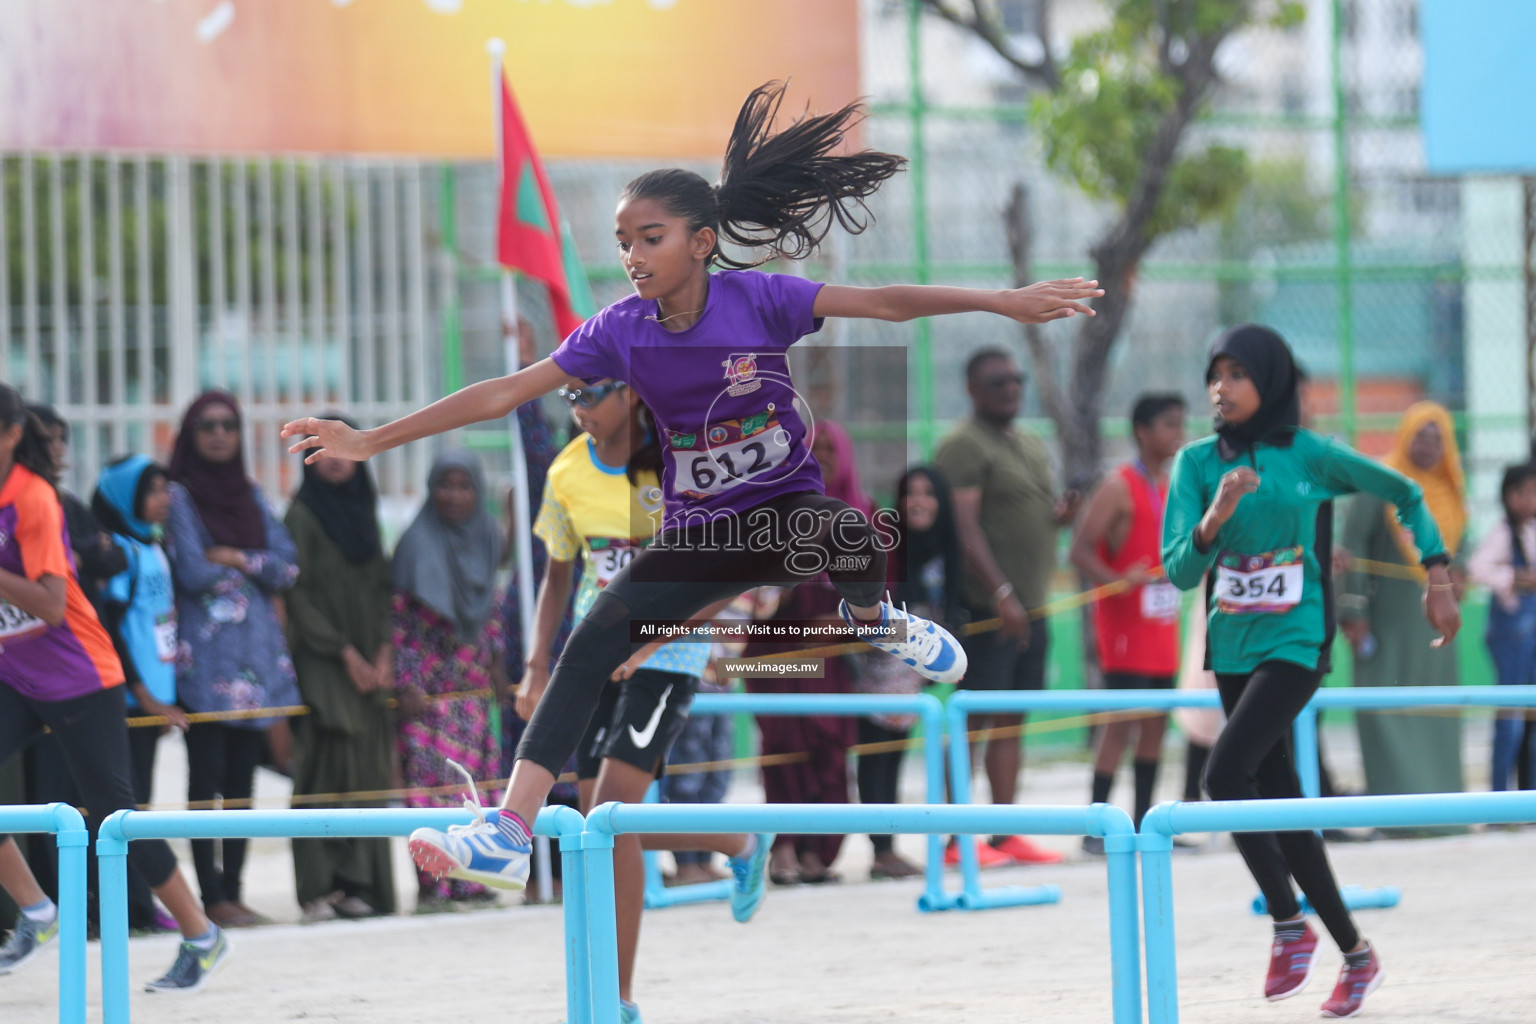 22nd Inter school Athletics Championship 2019 (Day 4) held in Male', Maldives on 07th August 2019 Photos: Suadhu Abdul Sattar / images.mv